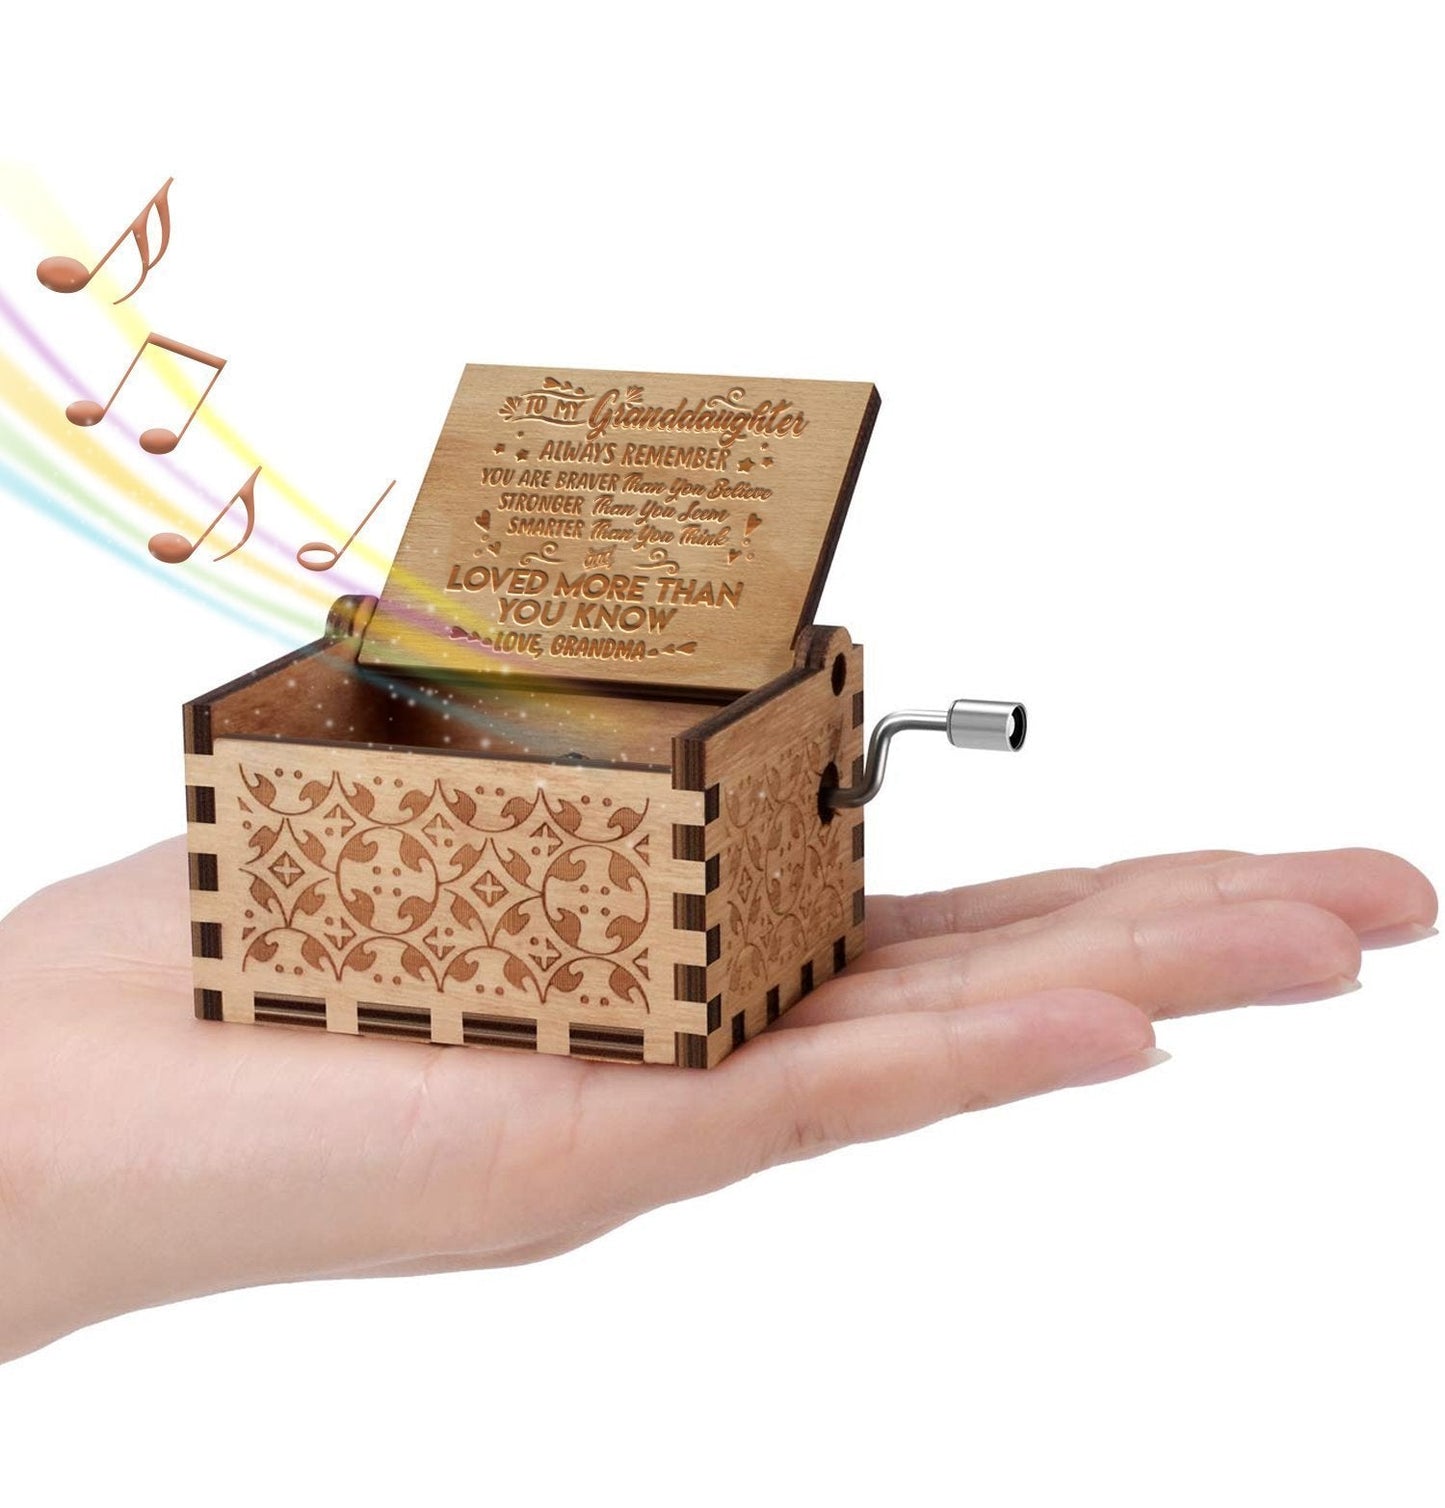 Grandma To Granddaughter - You Are Loved More Than You Know - Engraved Music Box